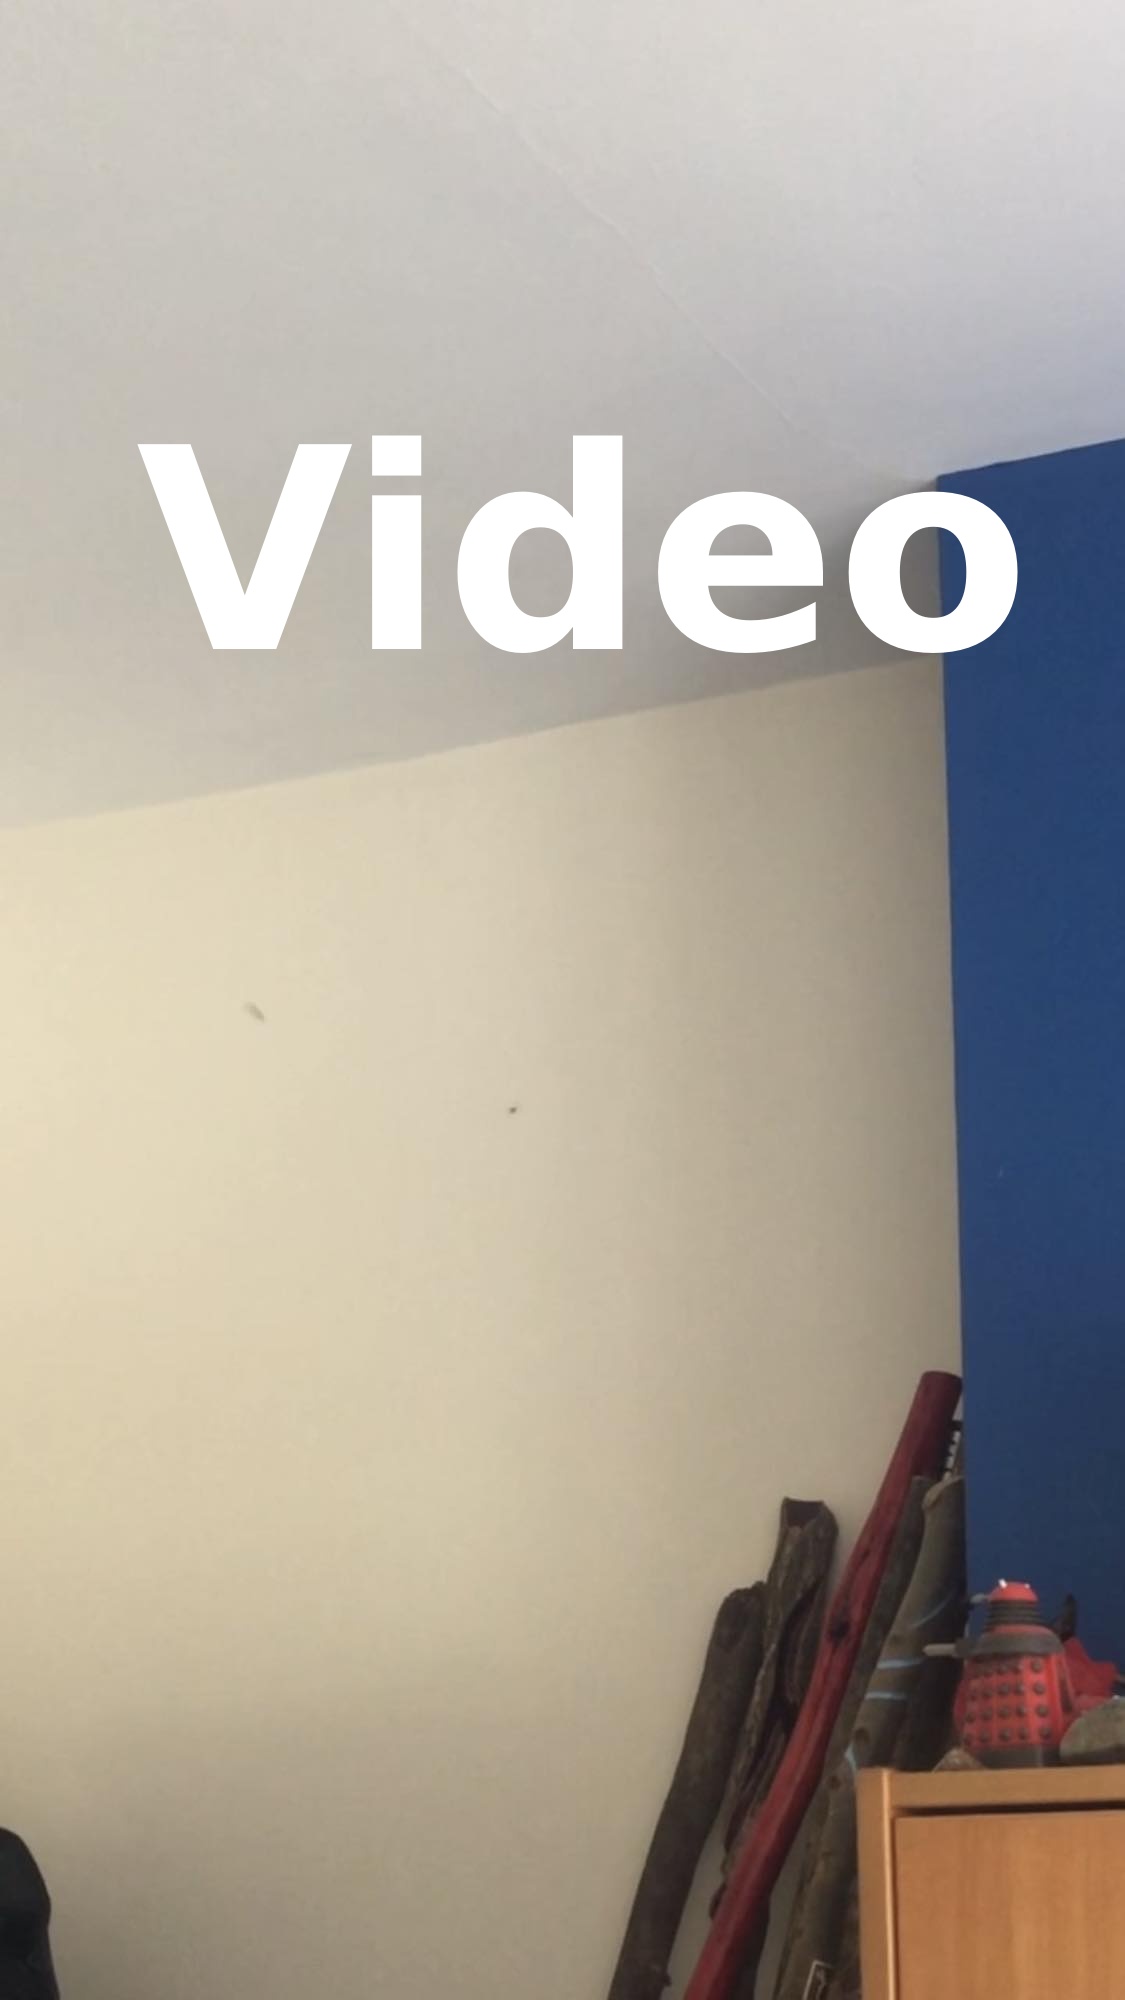 A link to a video, showing two flies dancing in that one corner of the room